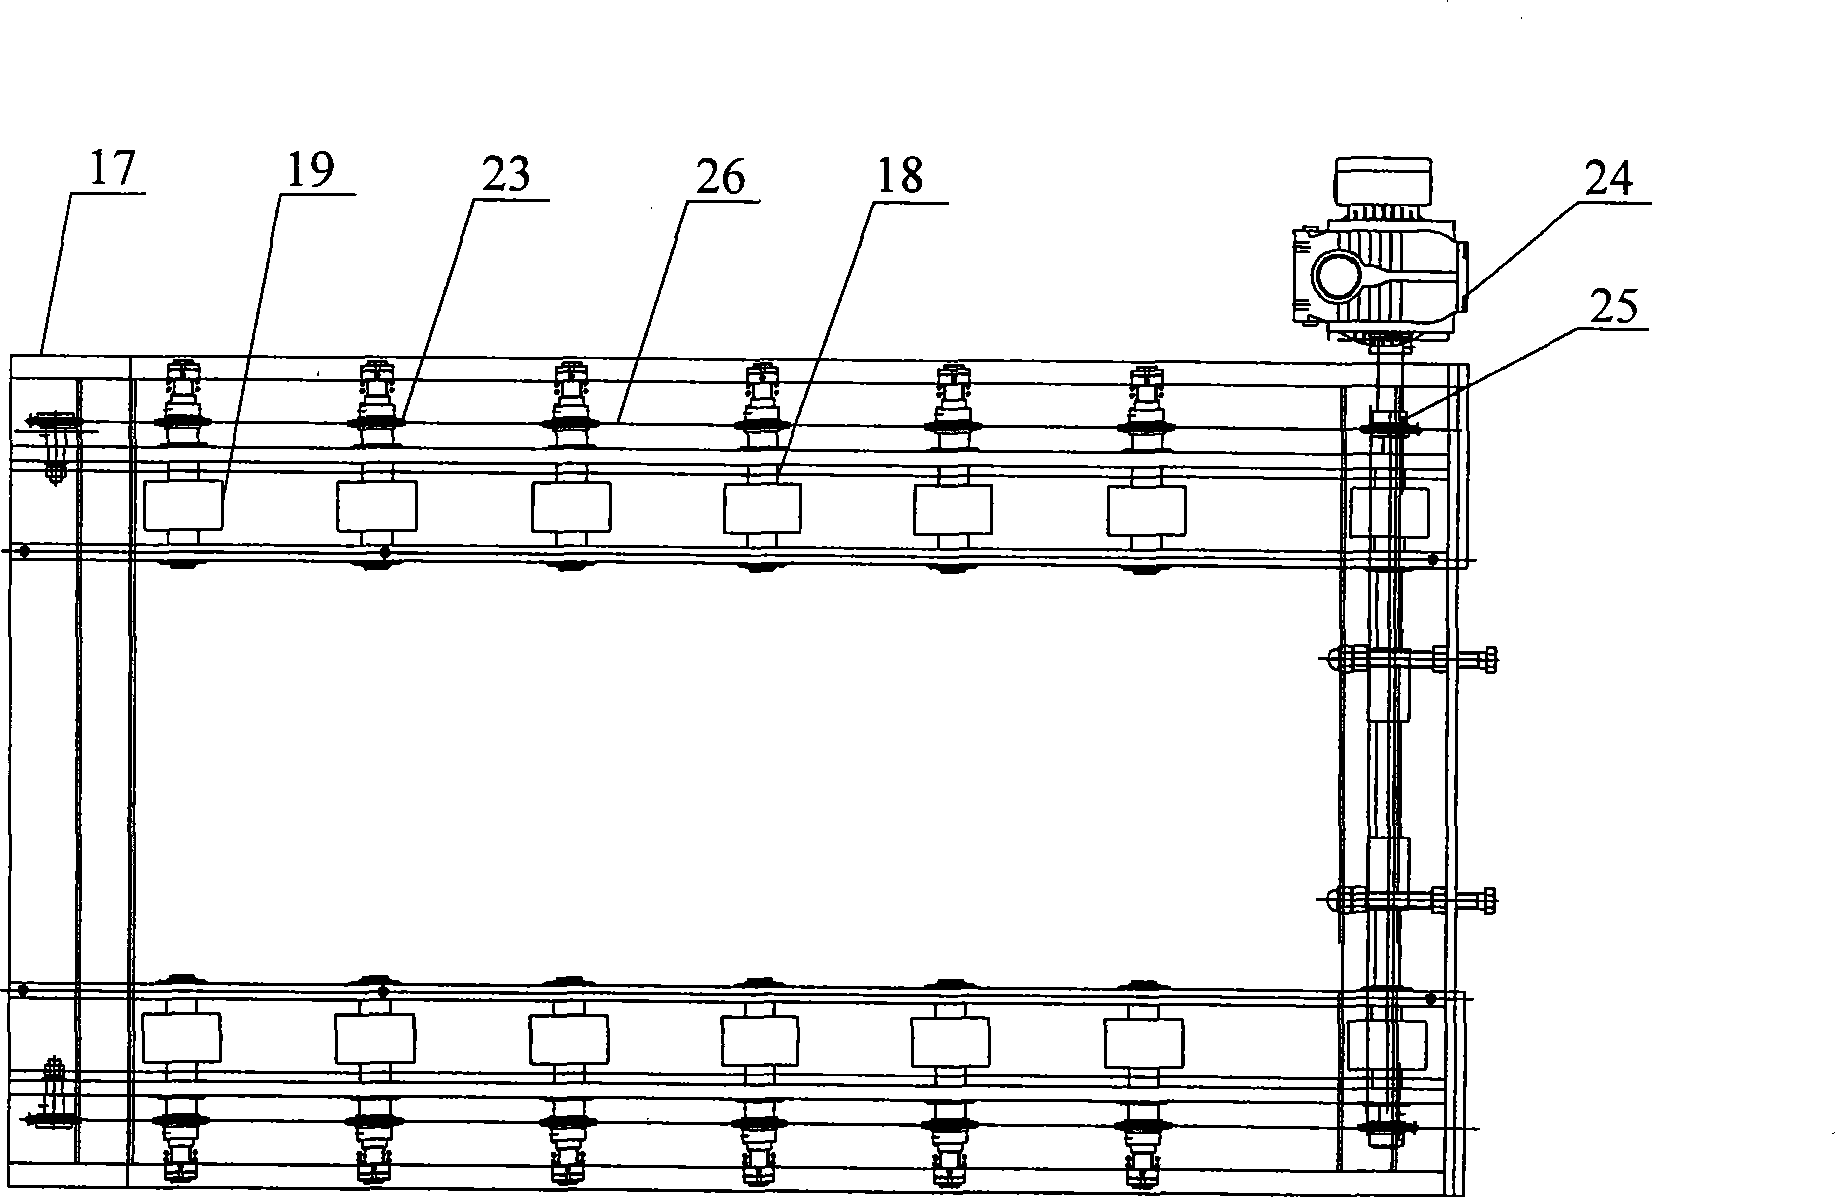 Transitional rolling bed with electric elevating apparatus for front axle end head